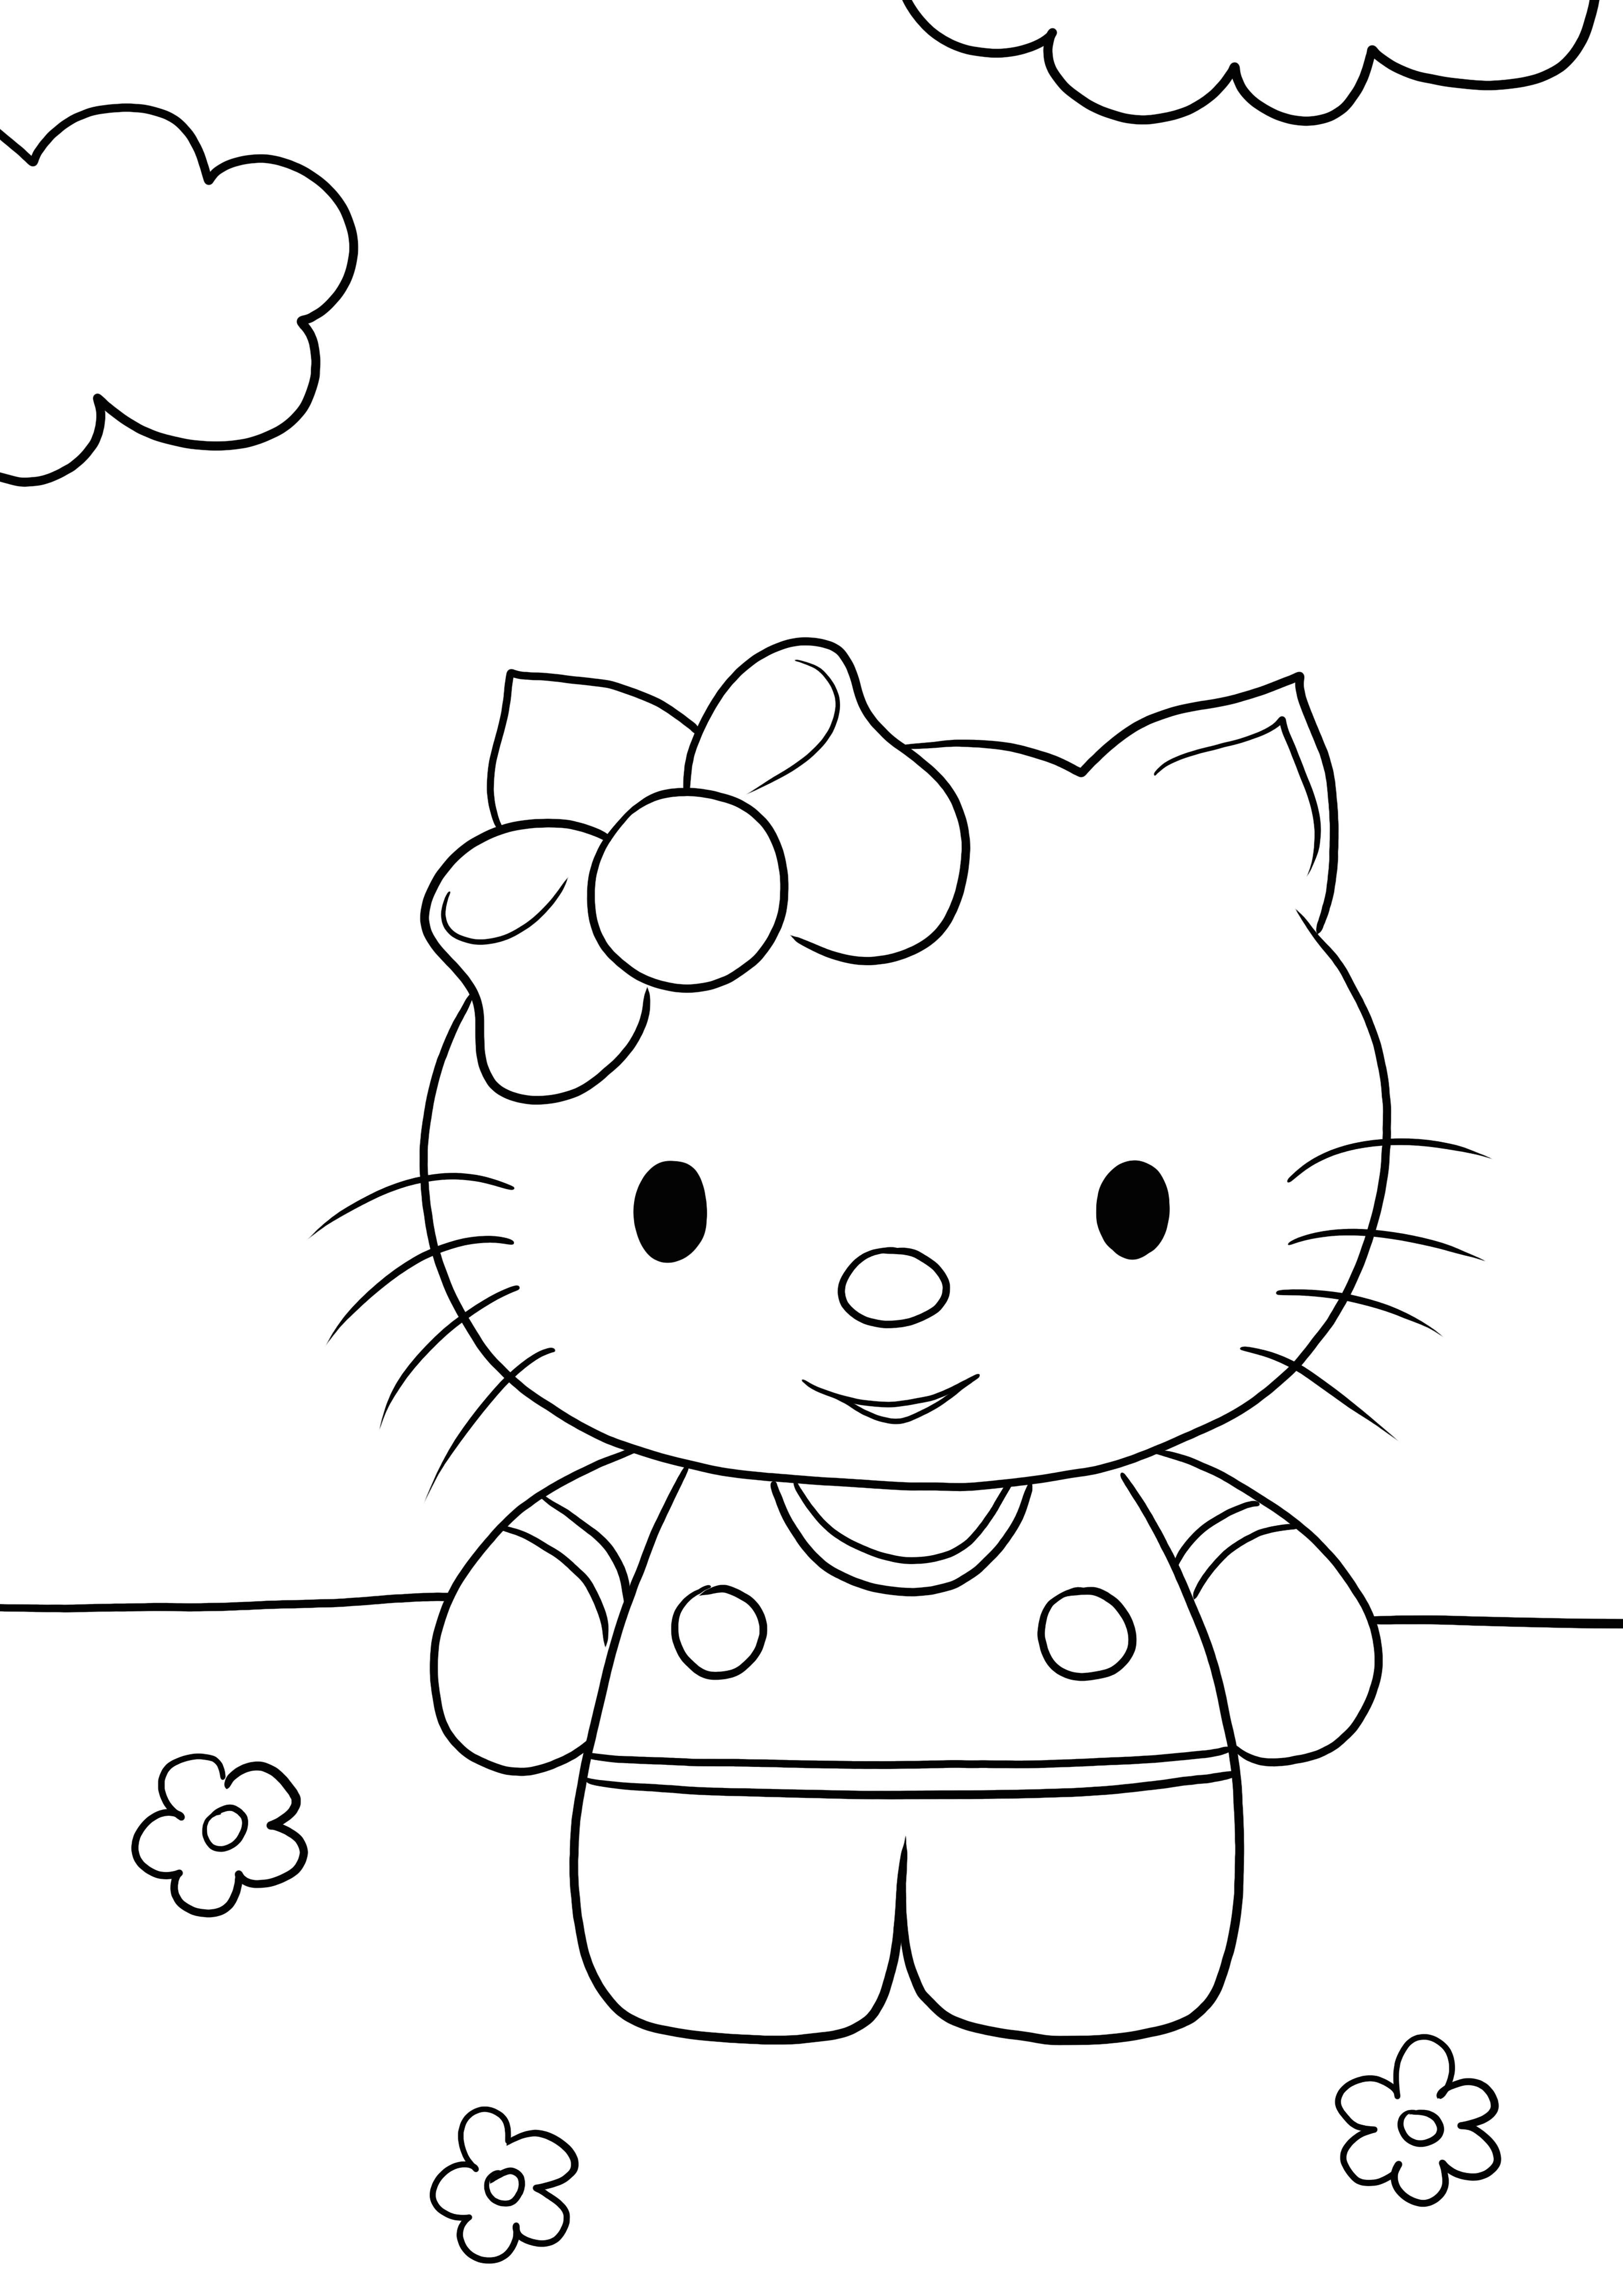 Free coloring image of smiling Hello Kitty to print or download